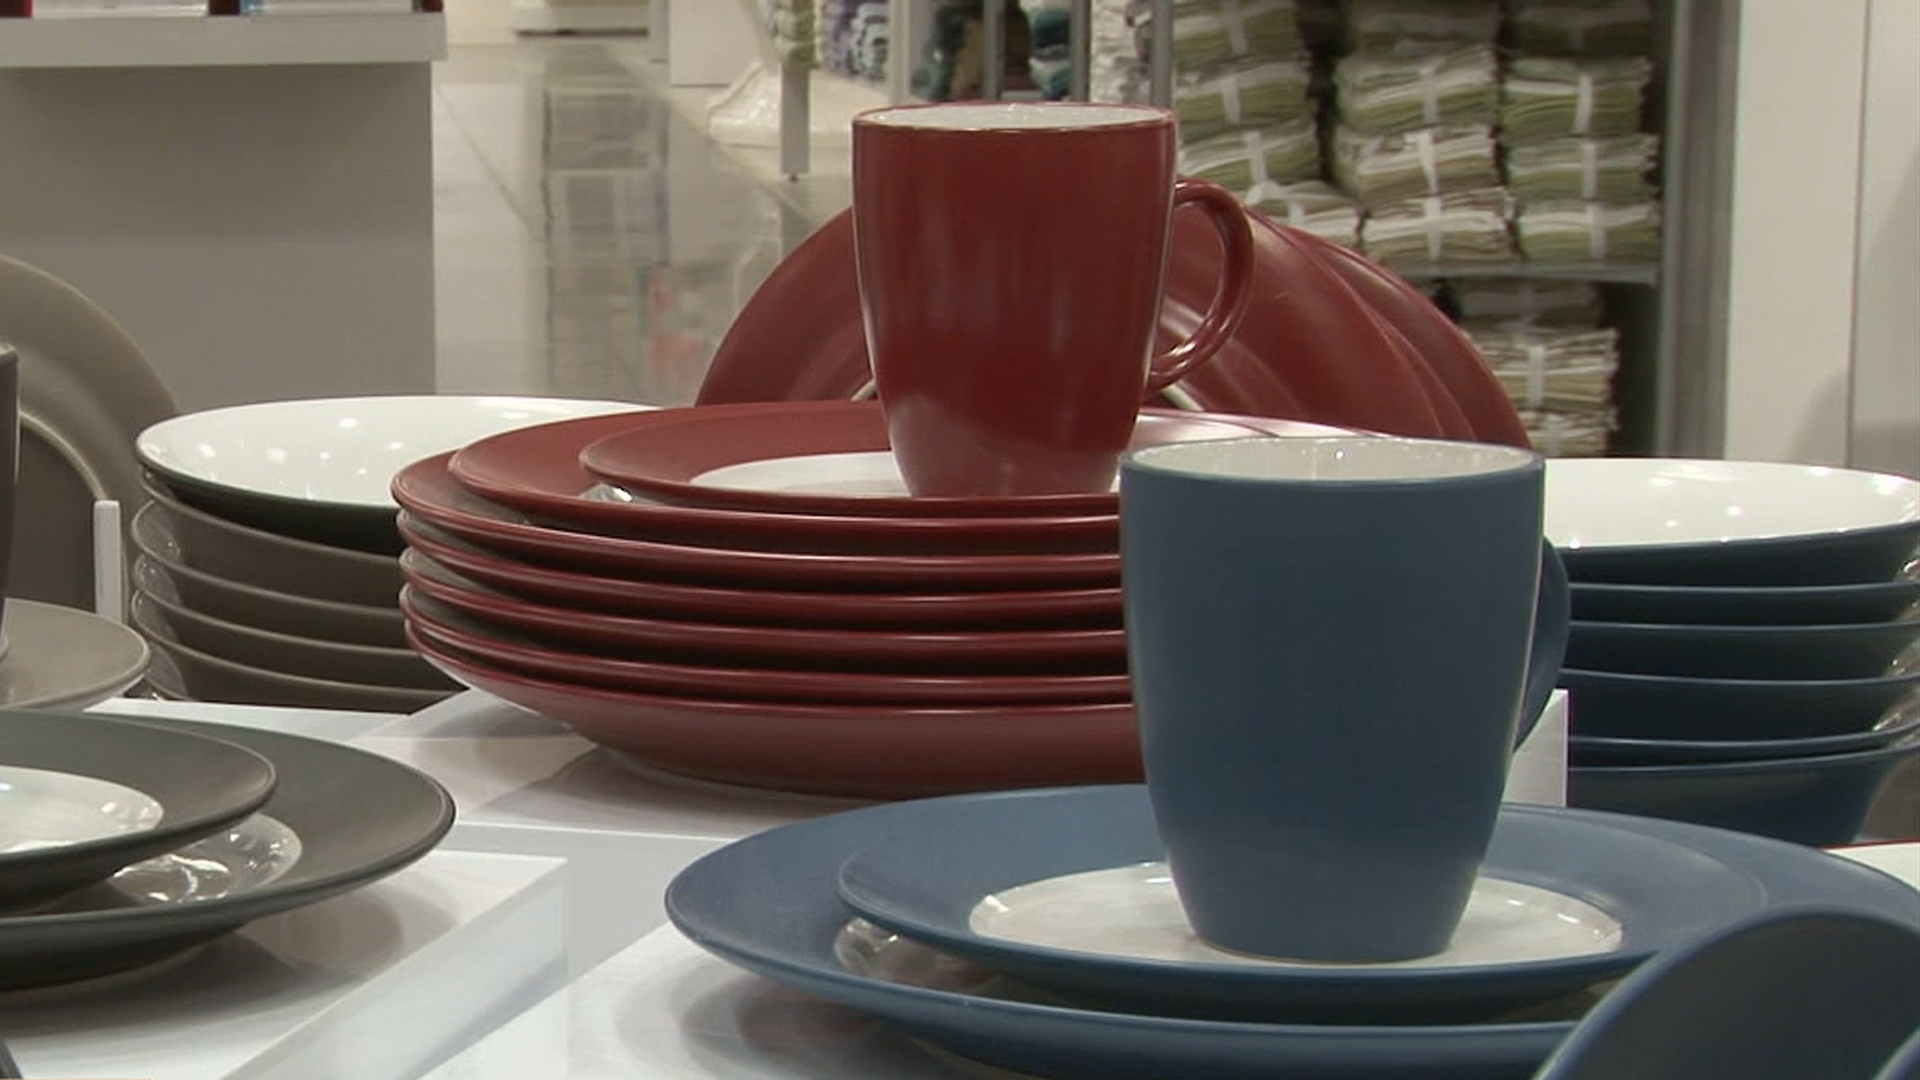 Is this the best time to buy dinnerware? - TODAY.com